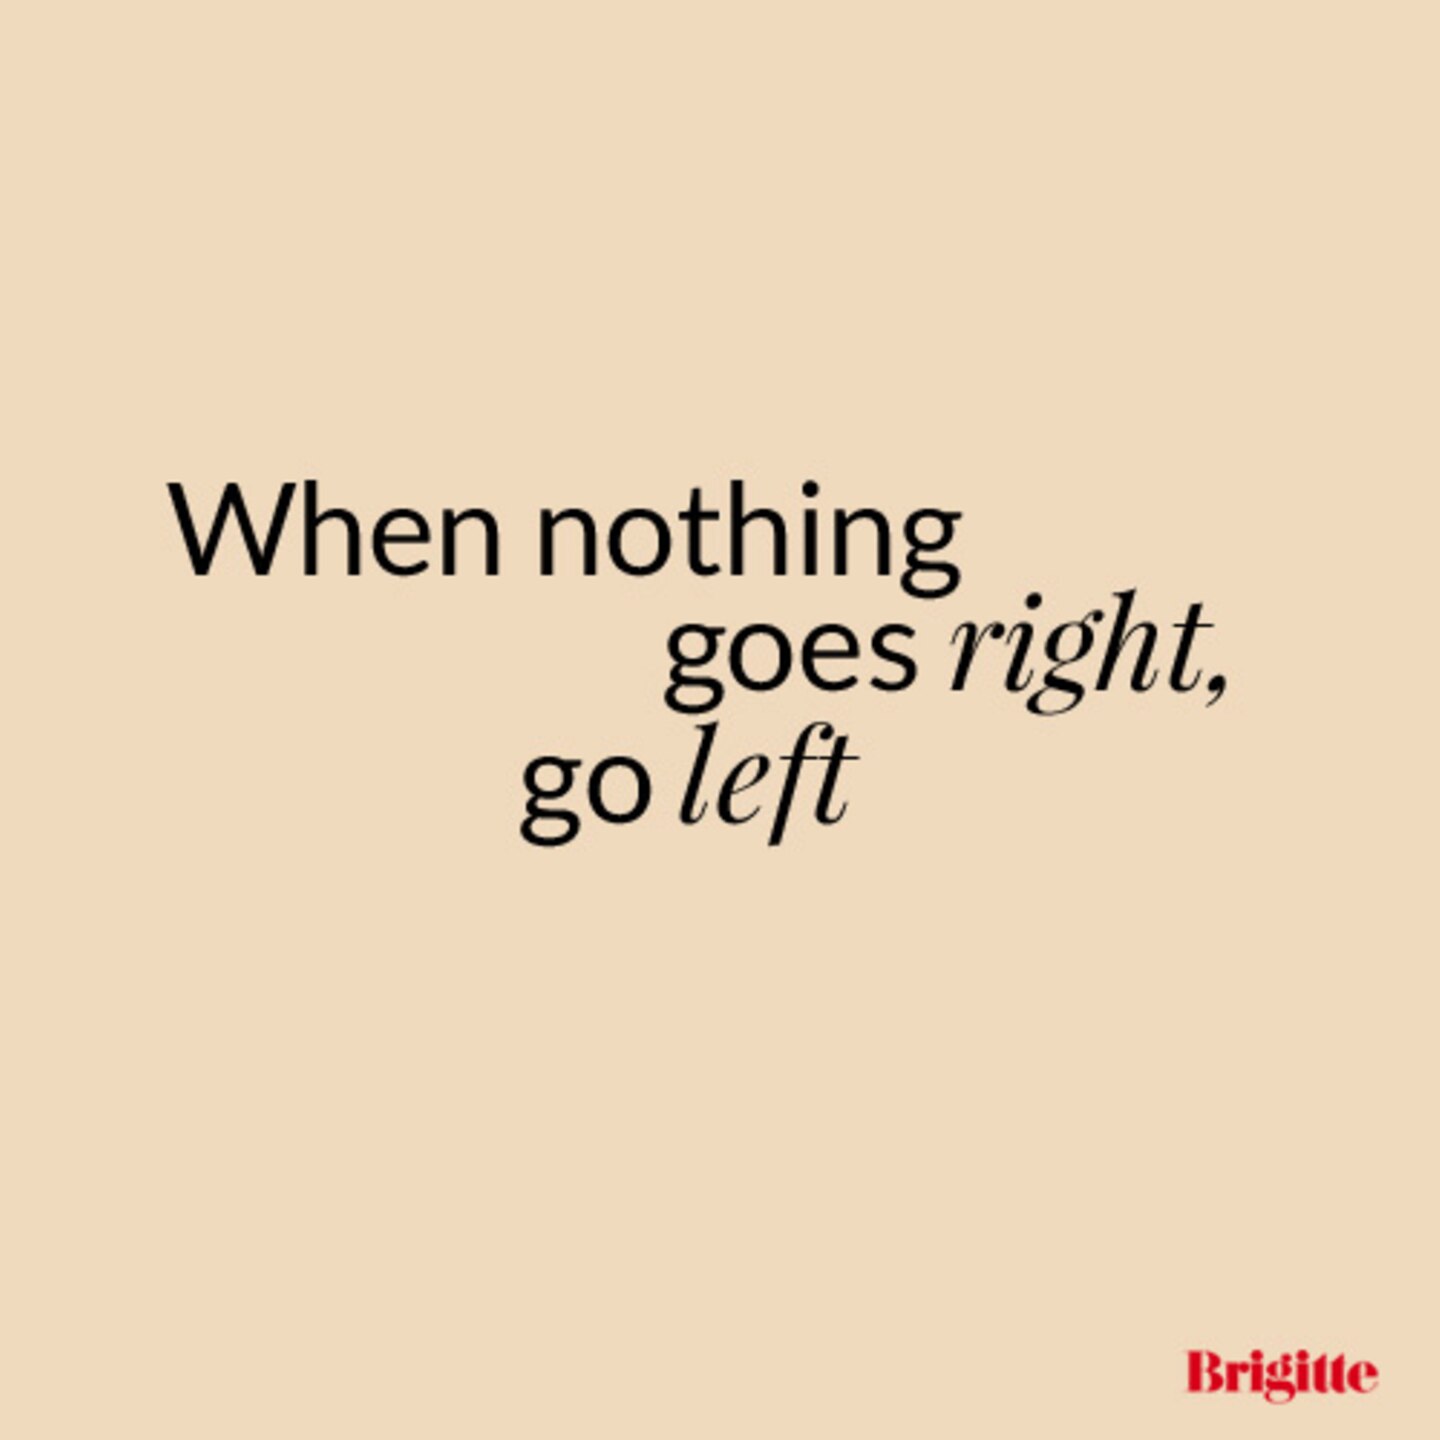 When nothing goes right, go left